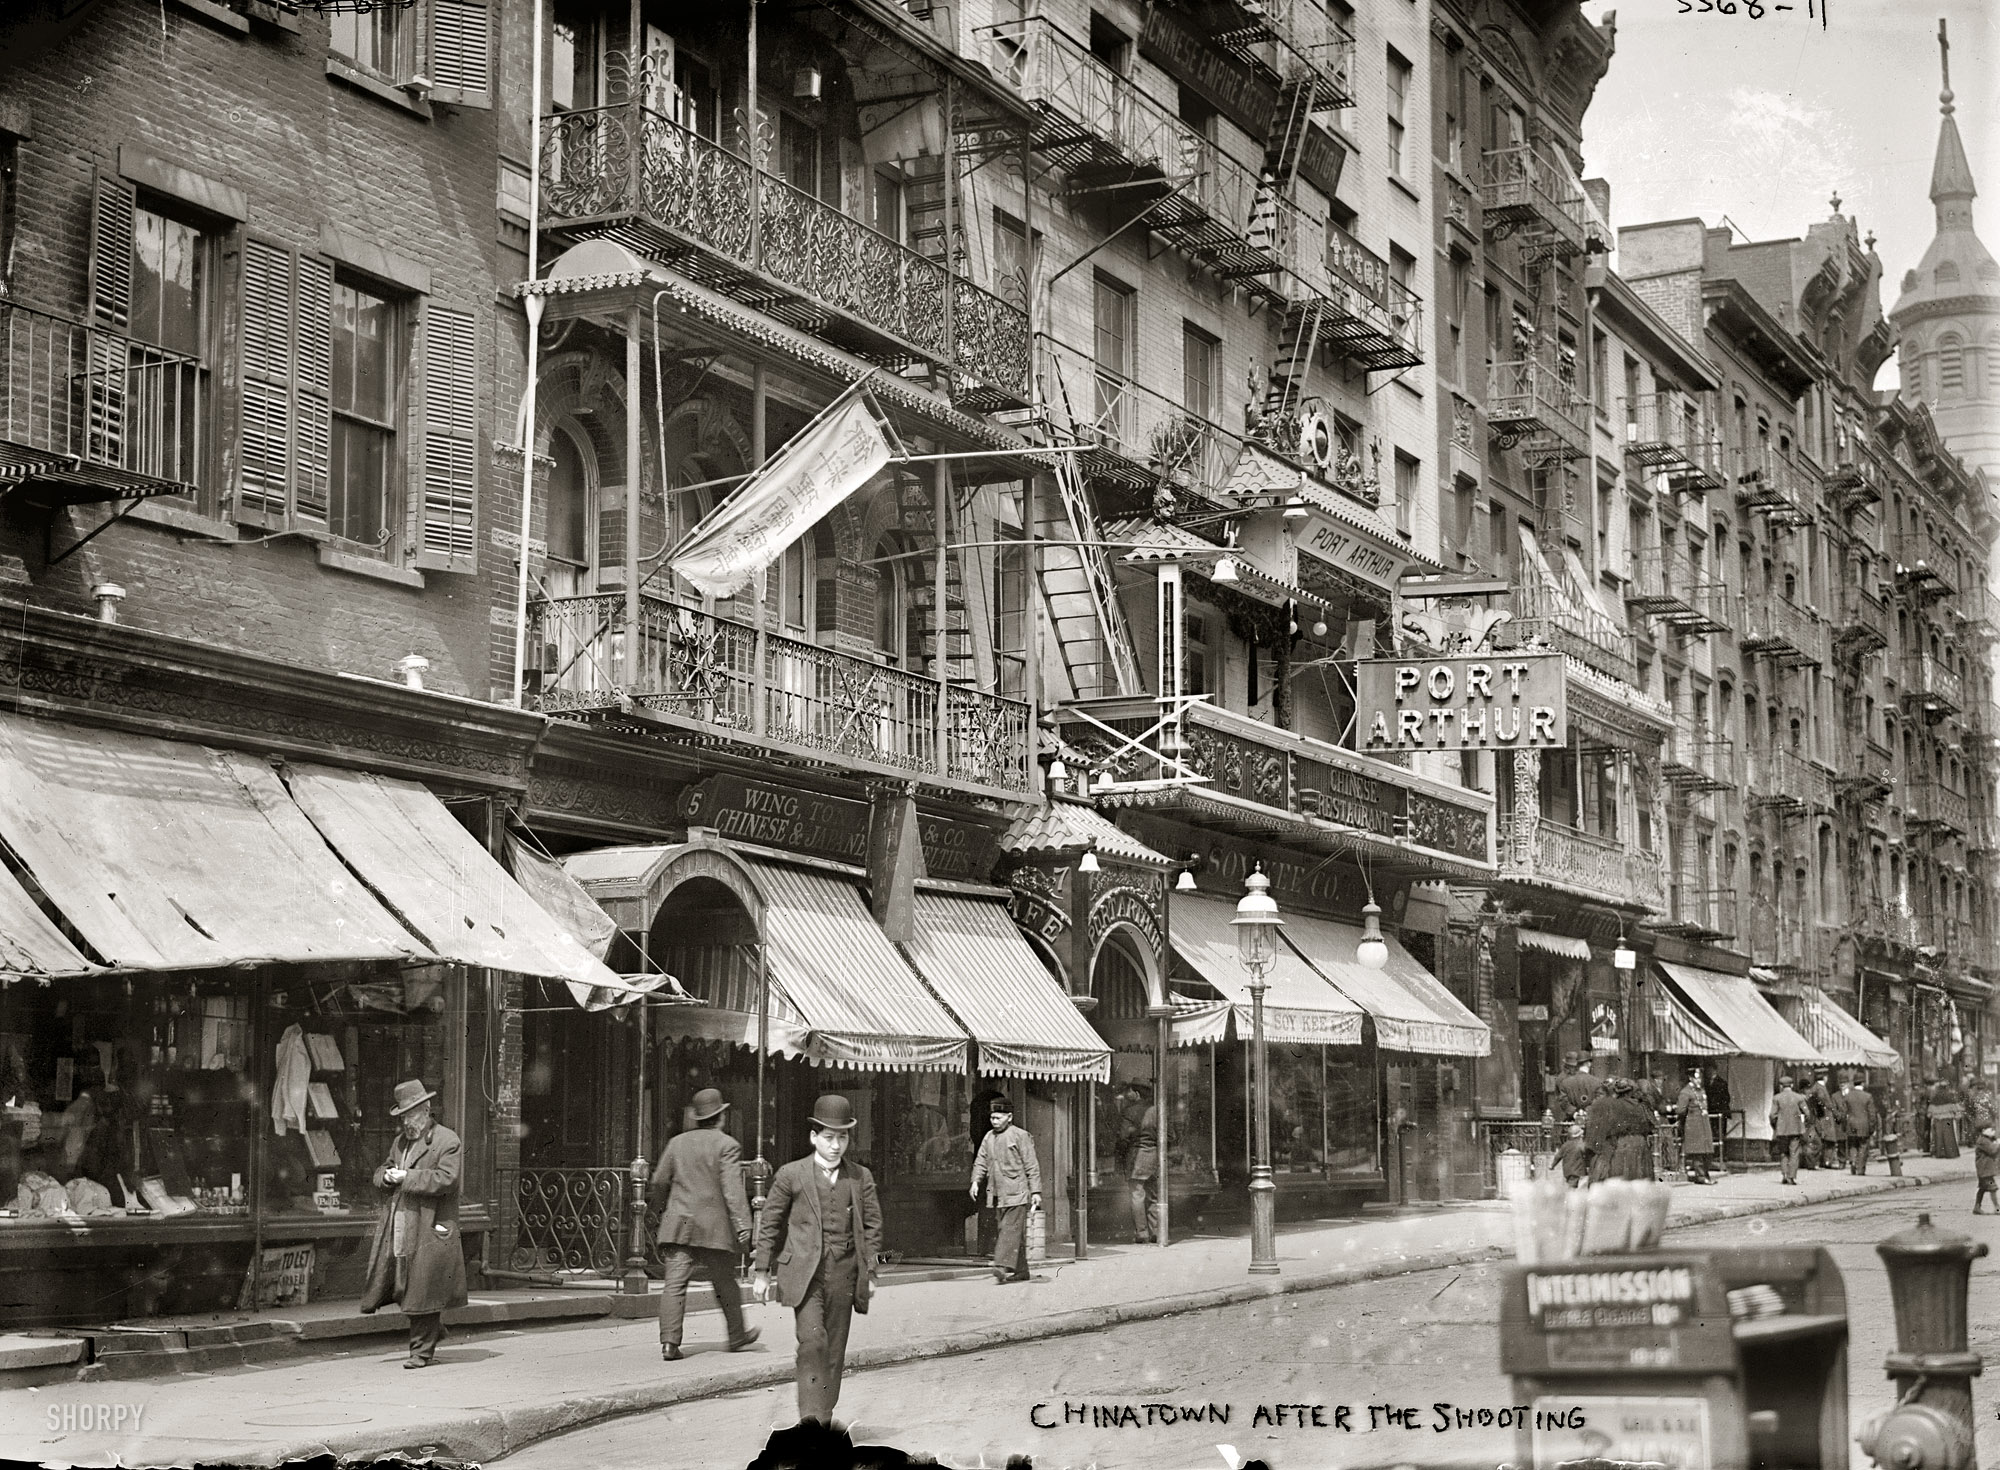 April 12, 1910. "Chinatown after shooting." The Port Arthur teahouse at 9 Mott Street in New York's Chinatown during the tong wars between the Hip Sings and On Leongs. 5x7 glass negative, George Grantham Bain Collection. View full size.